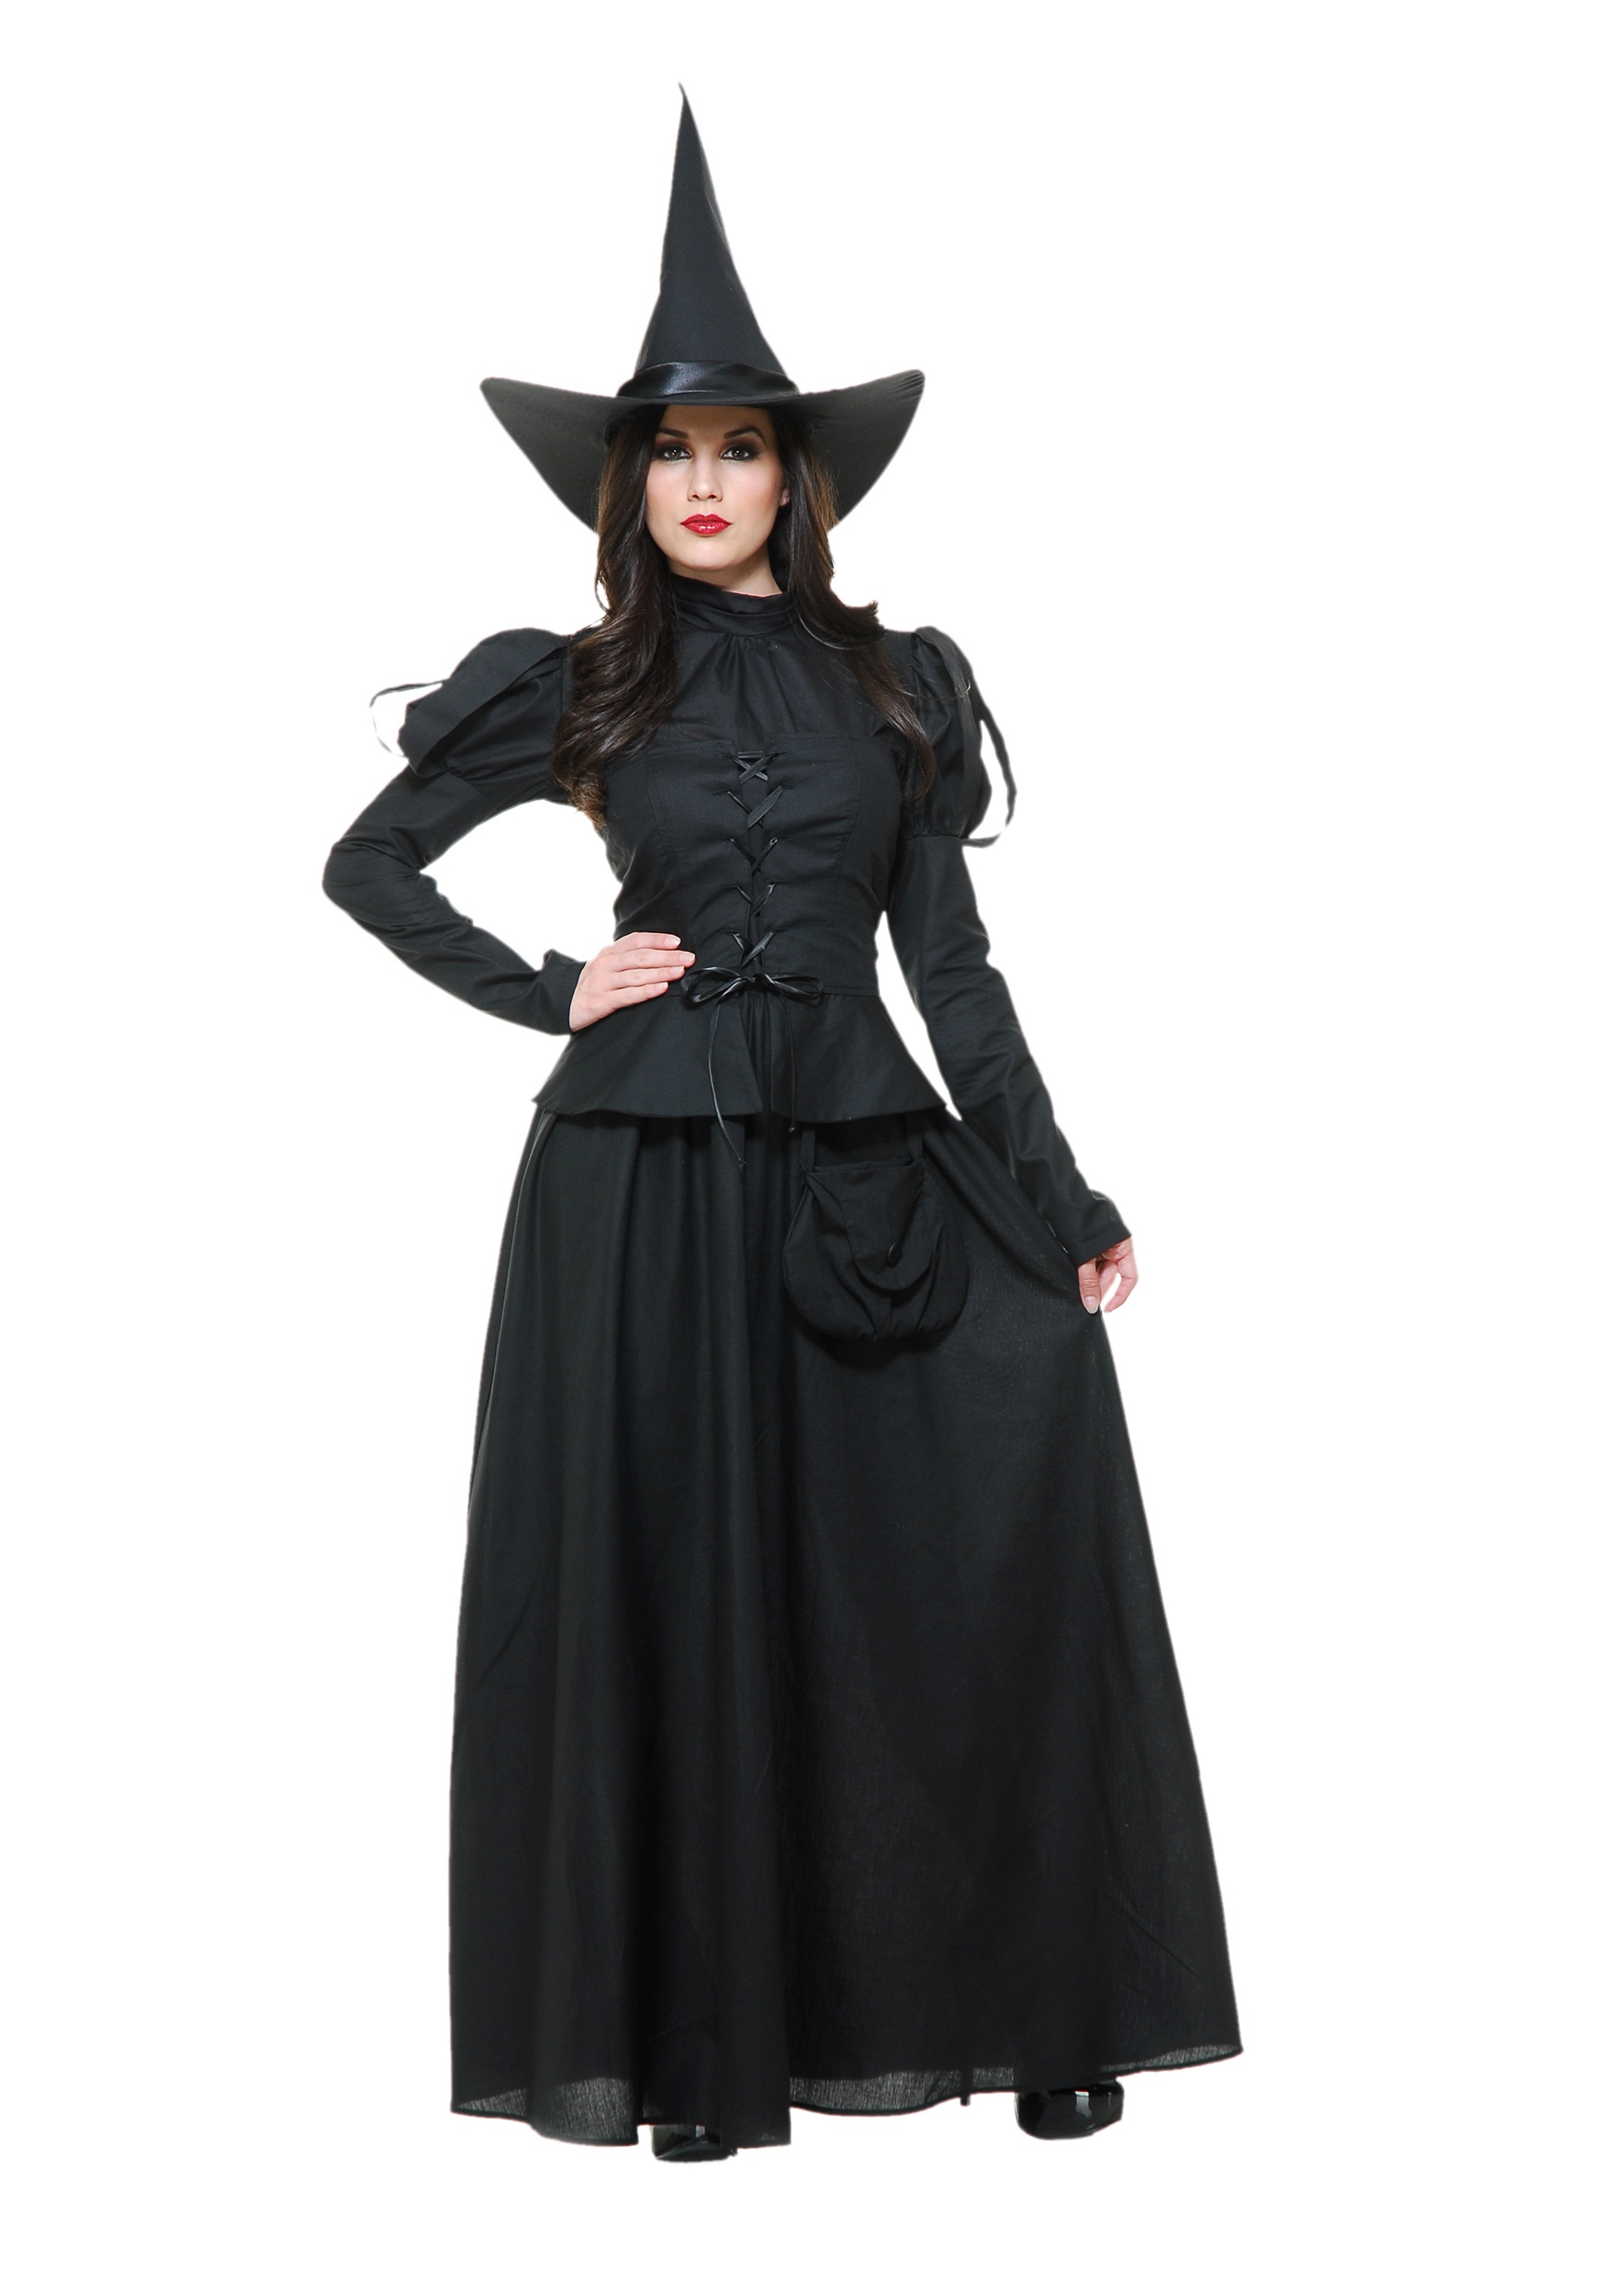 Ladies Long Black Wicked Witch Costume dress hat & cape Halloween costume